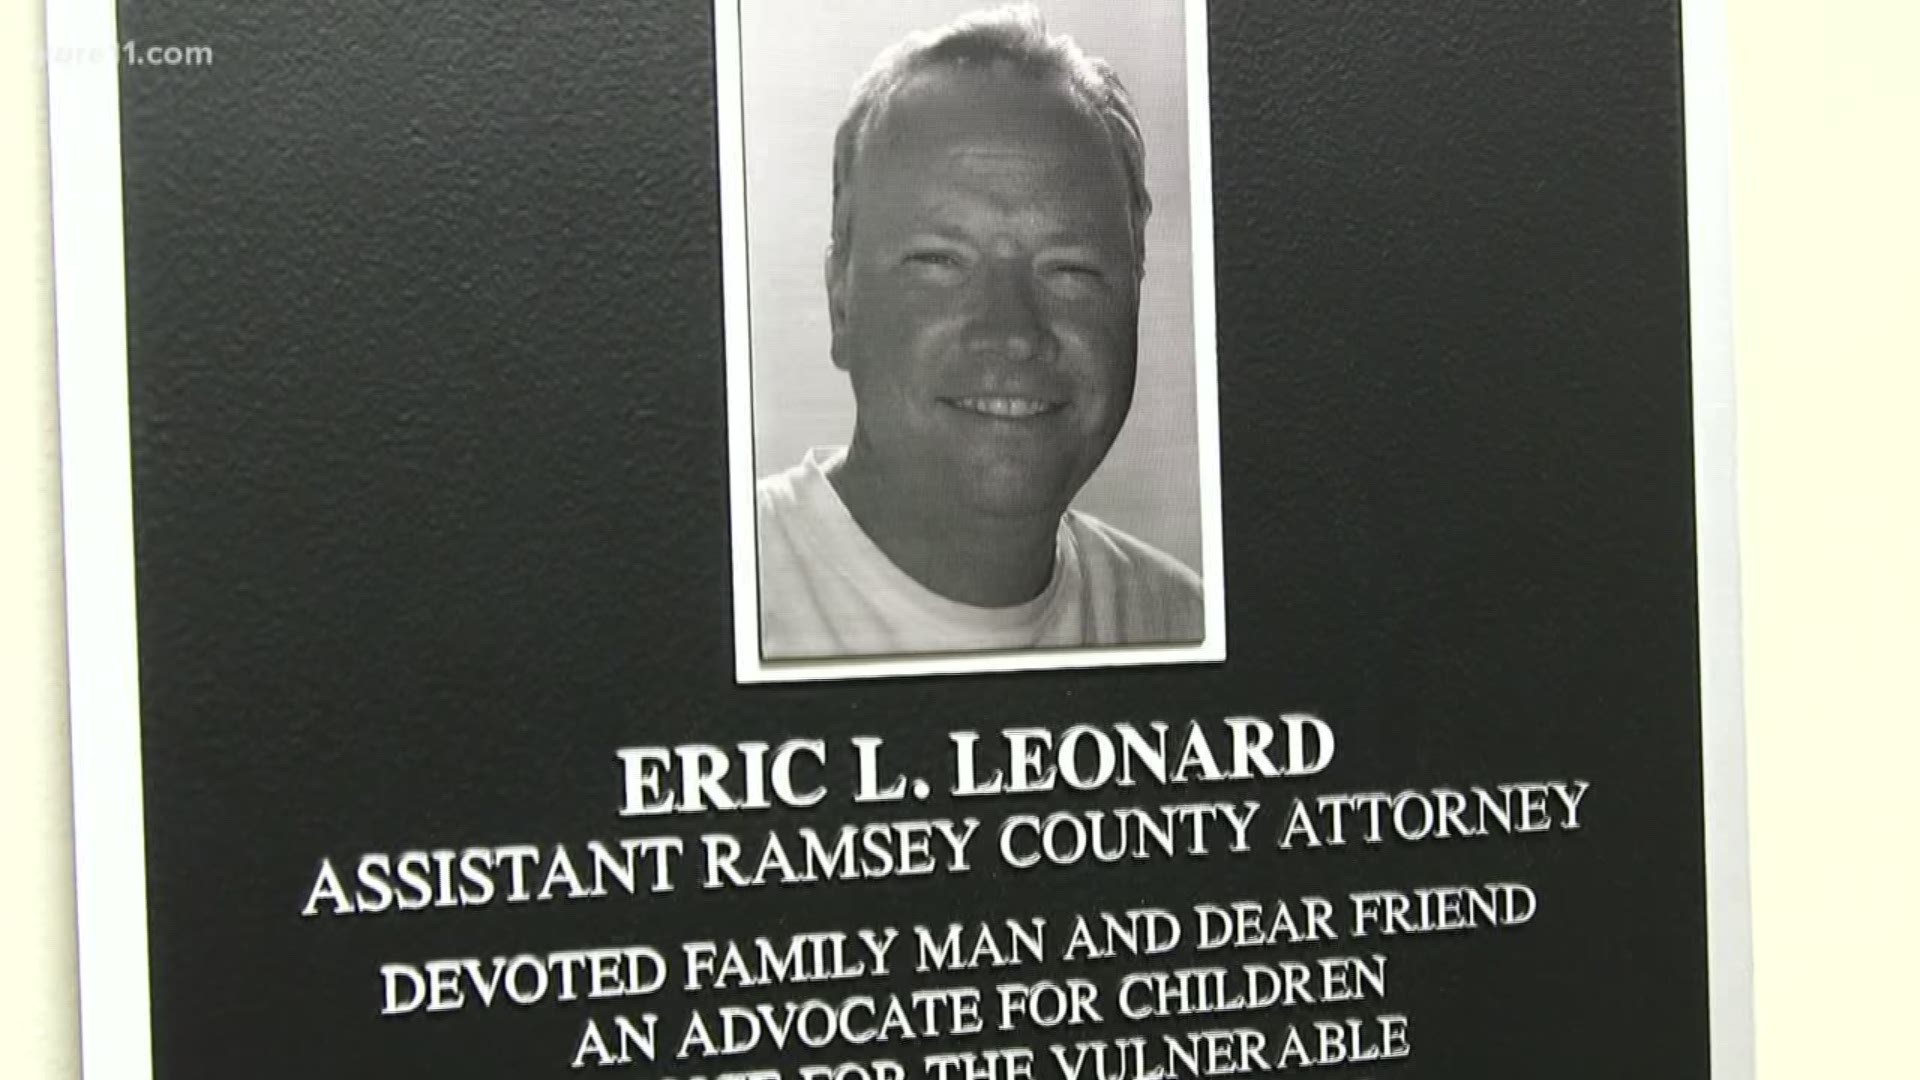 A Ramsey County prosecutor is being honored for his hard work to achieve justice for some of the most vulnerable children. A room at the county attorney's office will bear his legacy. https://kare11.tv/2MHpleC